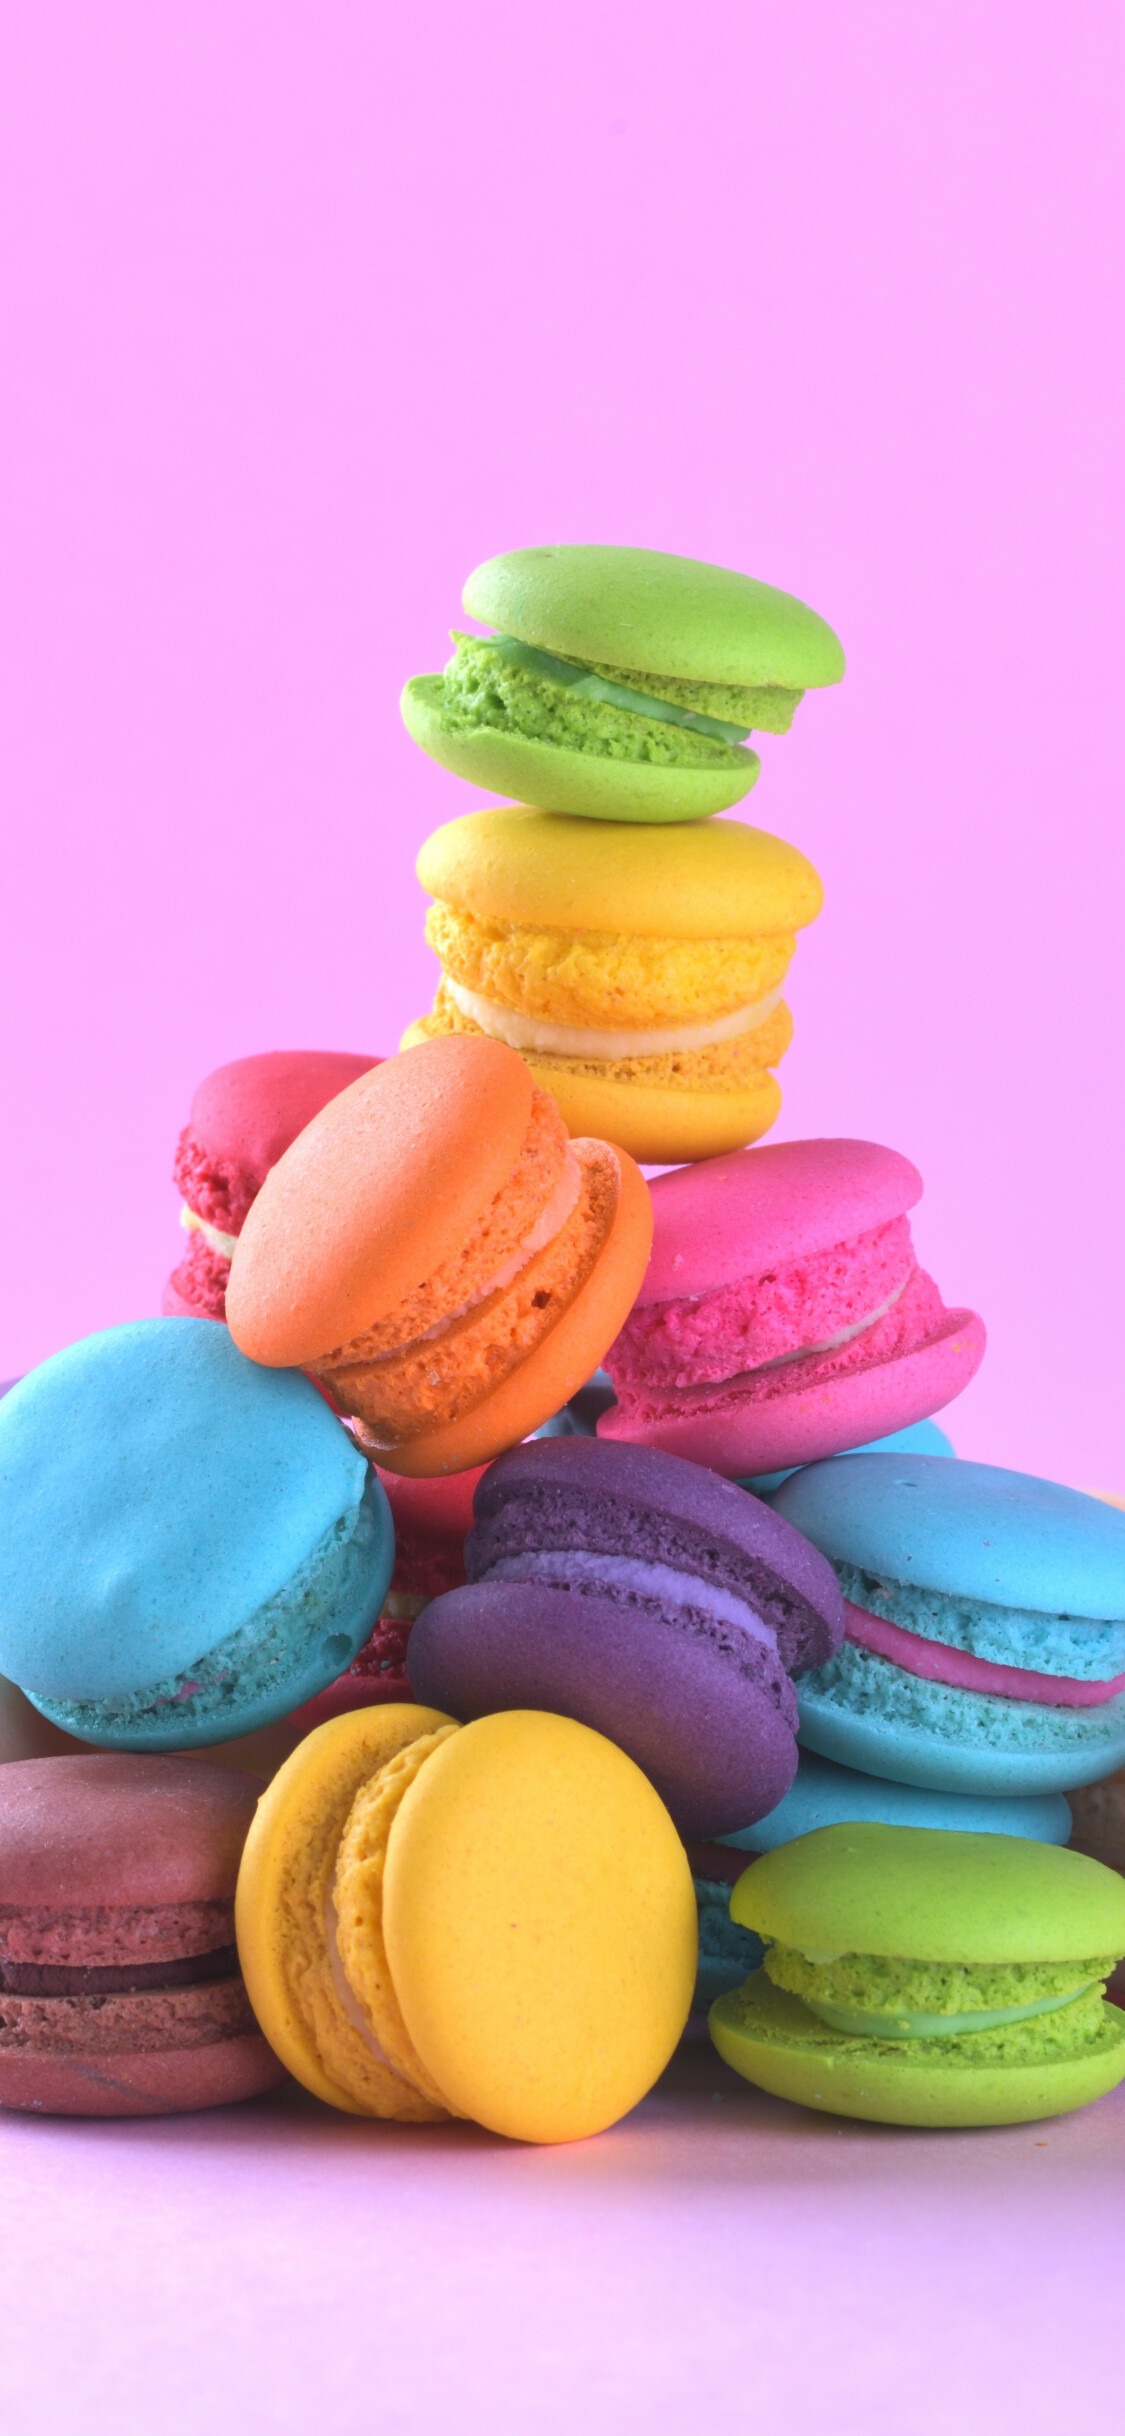 Sweets: Macaron, A confection made up of two round, flat, almond-flour-based cookies. 1130x2440 HD Wallpaper.